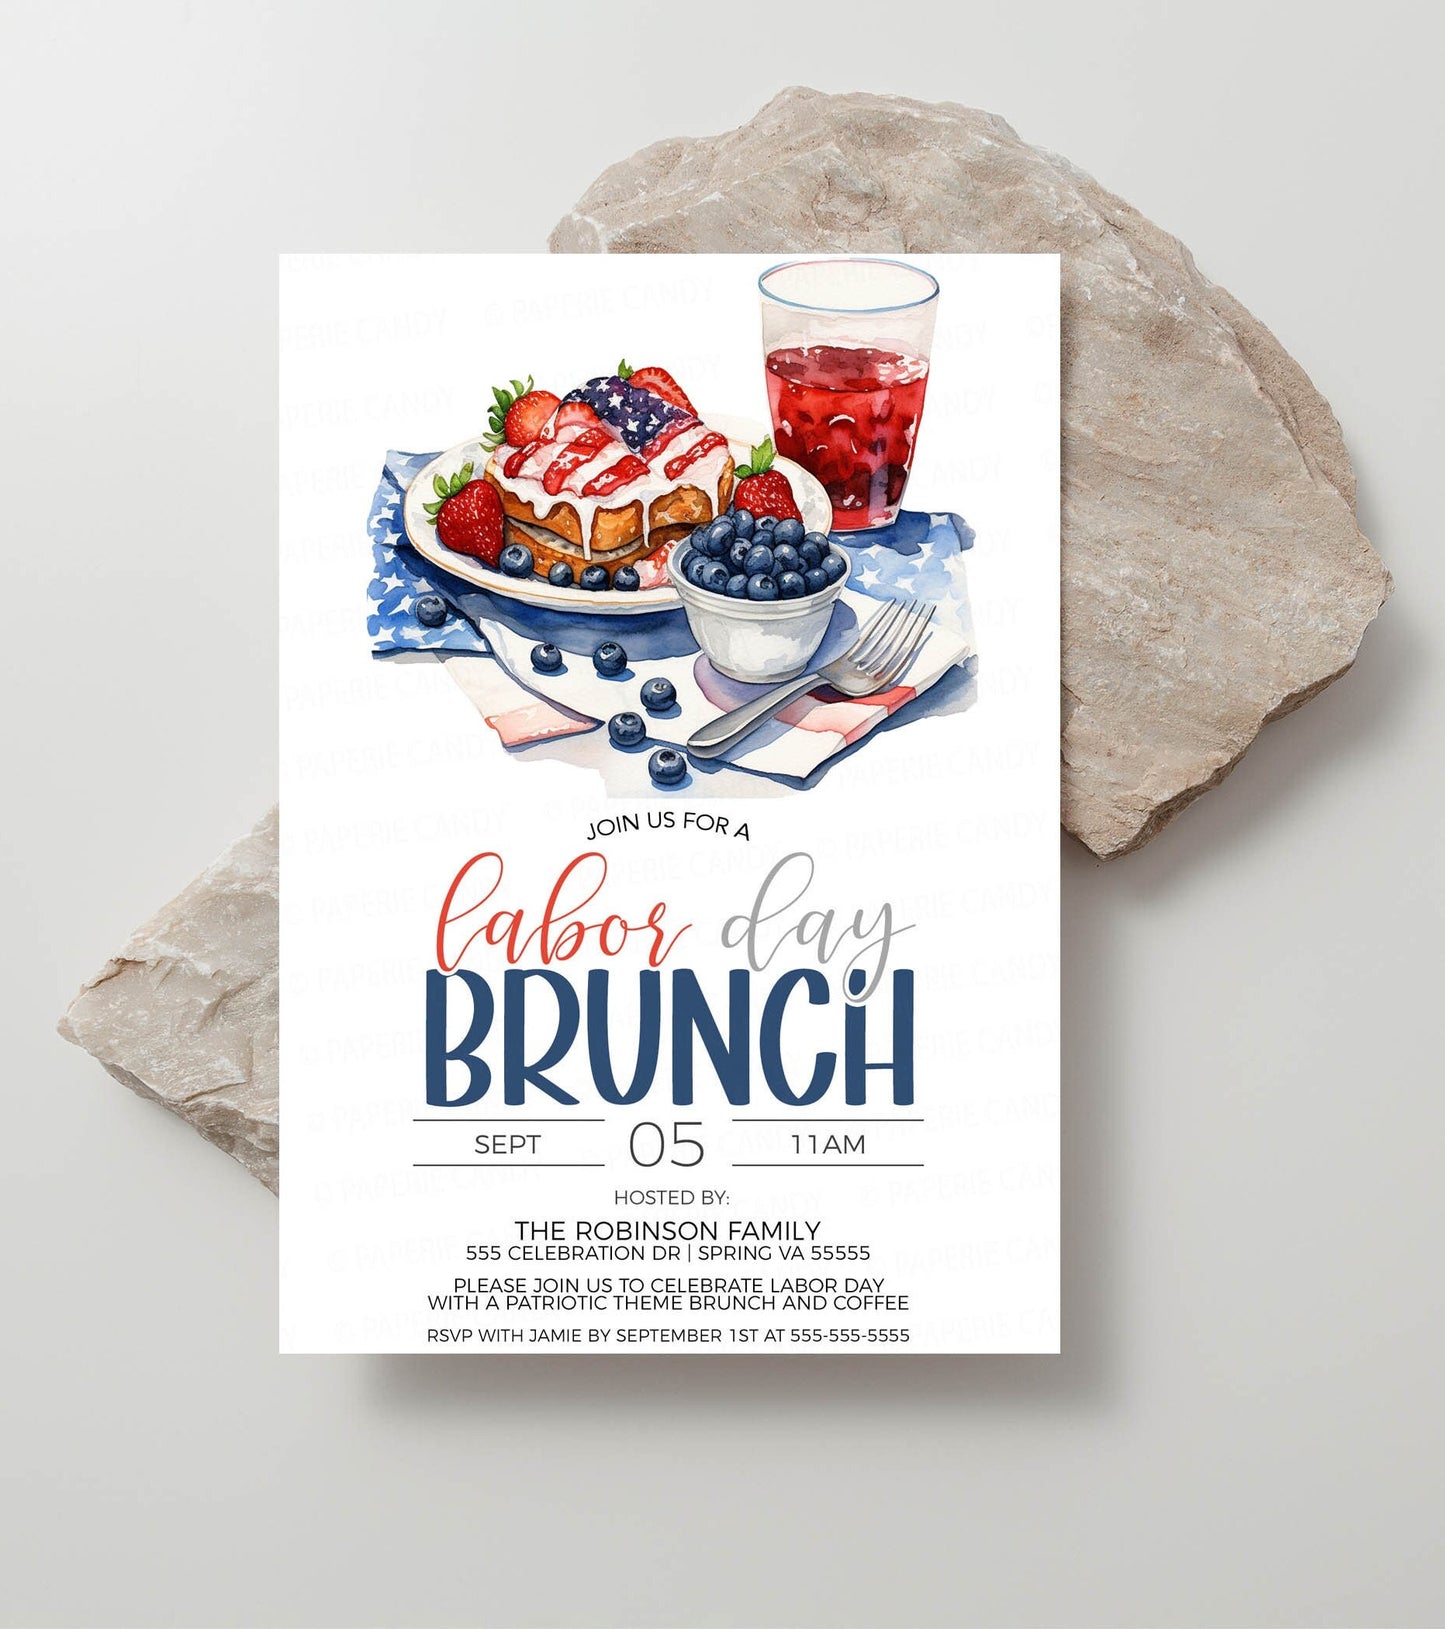 Labor Day Brunch Invitation, Labor Day Lunch Invite, Labor Day Lunch, Patriotic Brunch Lunch, Red White Blue, Editable Printable Template